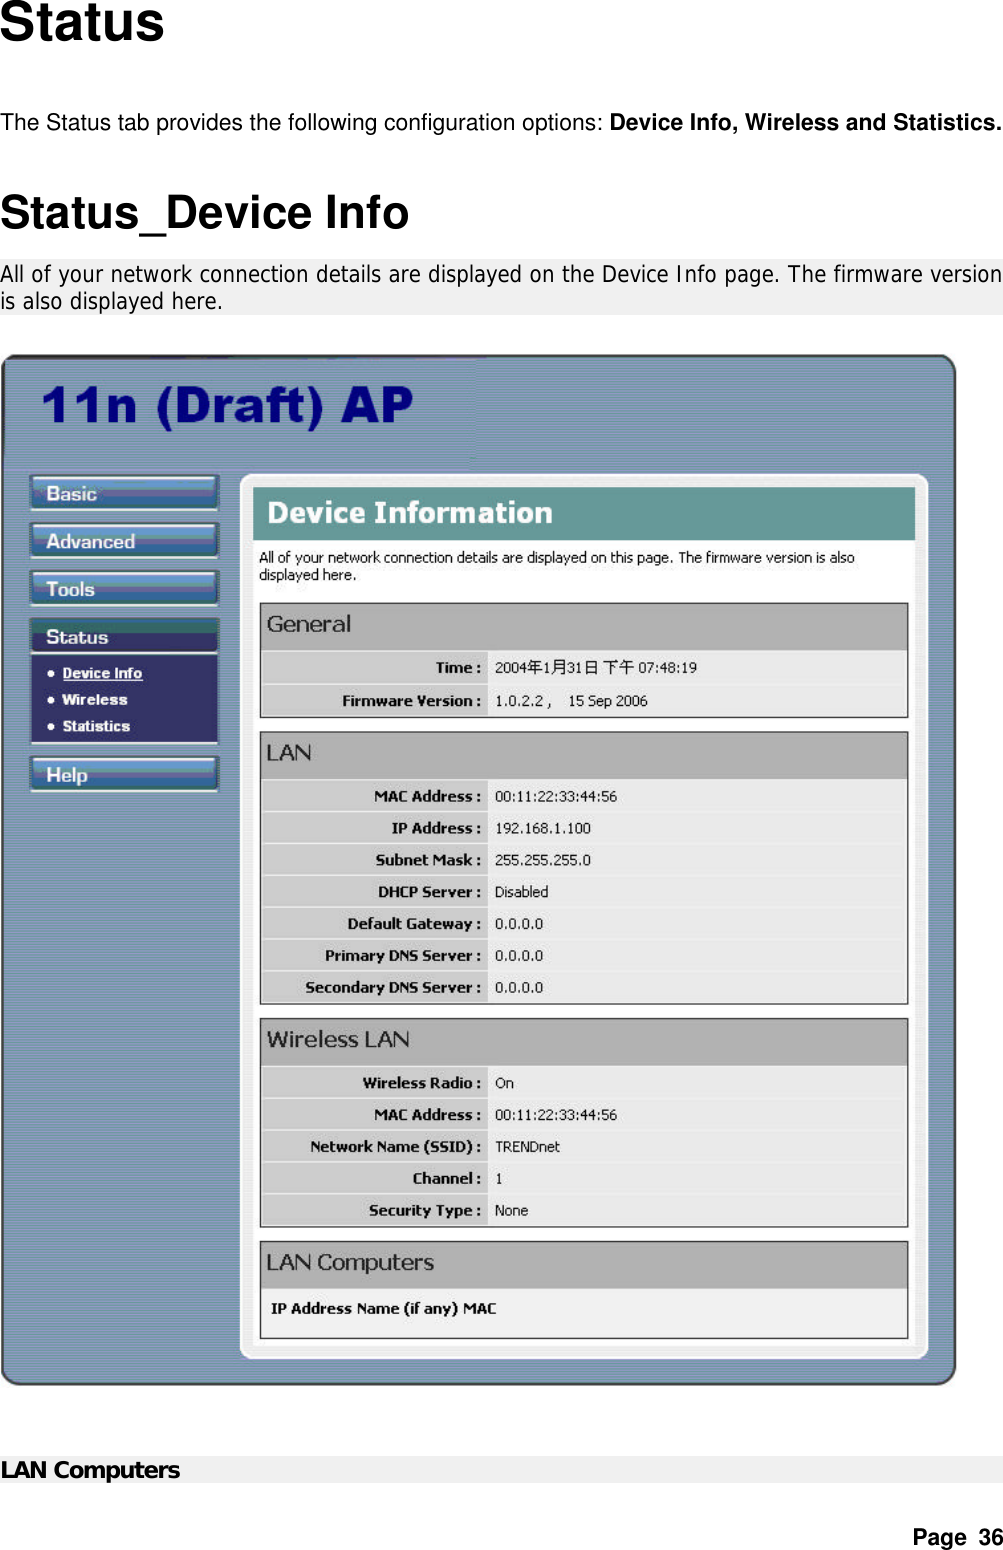 Page  36 Status  The Status tab provides the following configuration options: Device Info, Wireless and Statistics.  Status_Device Info All of your network connection details are displayed on the Device Info page. The firmware version is also displayed here.      LAN Computers   